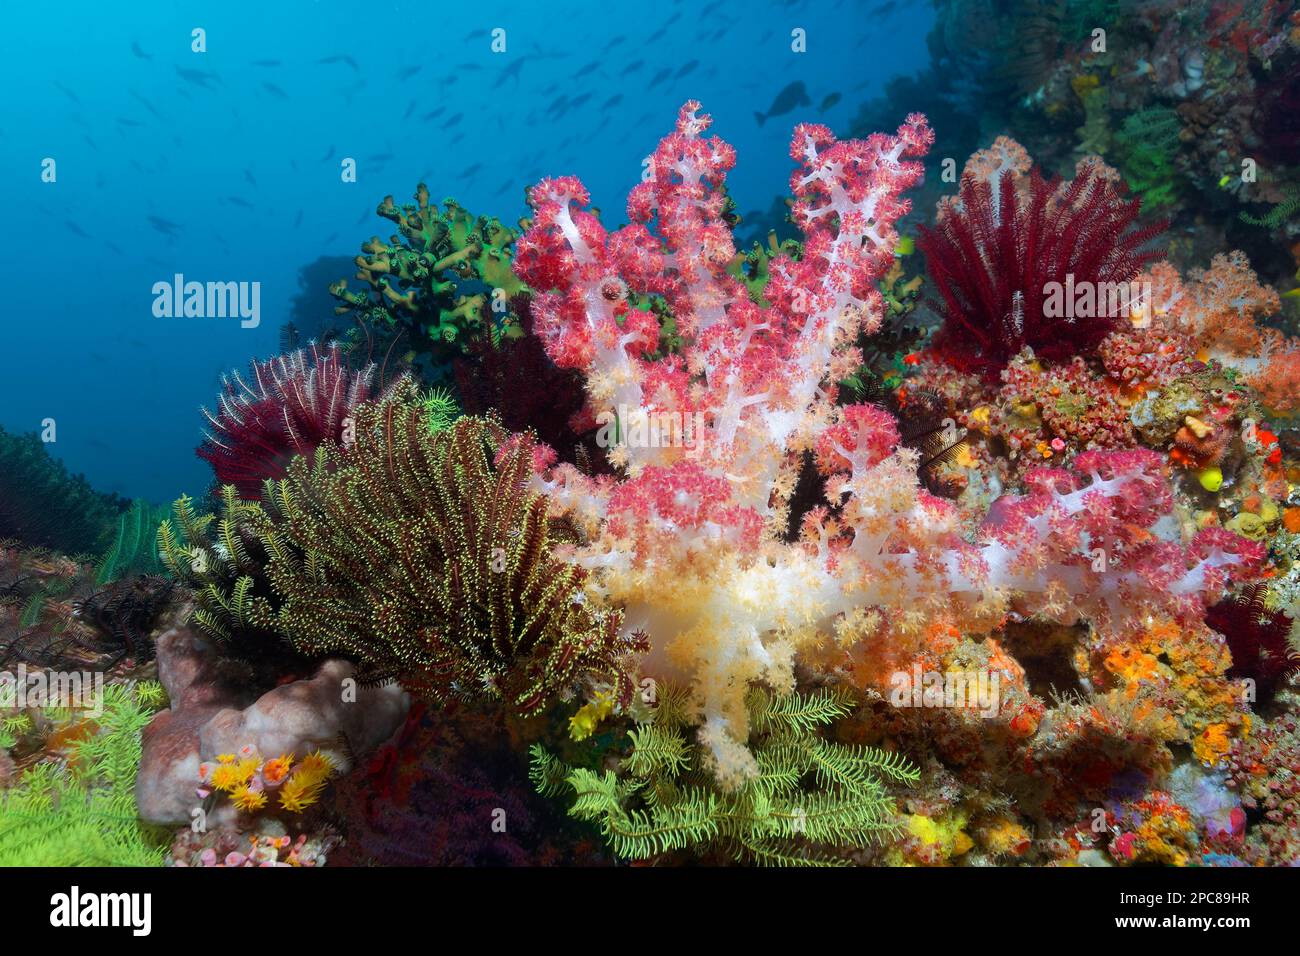 Middle Soft coral (Dendronephthya), left, right and bottom various feather star (Crinoidea) (Crinozoa), back black sun coral (Tubastrea micranthus) Stock Photo